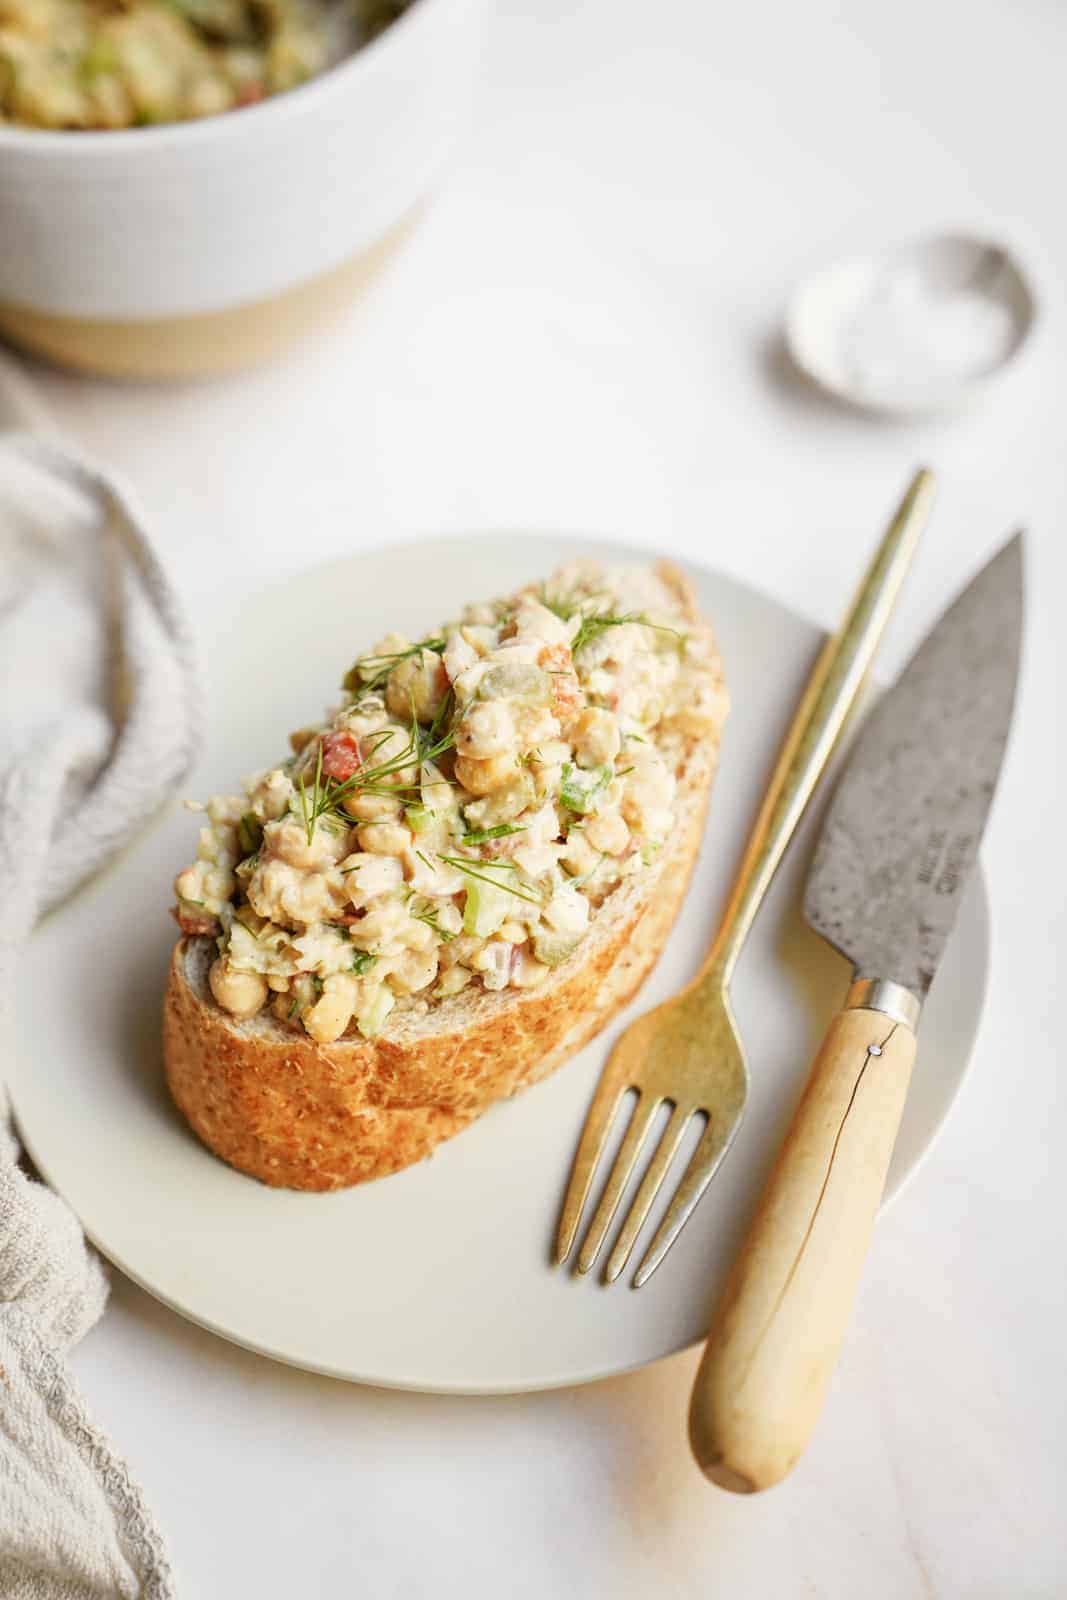 Mashed Chickpea Salad sitting on a piece of bread on a plate